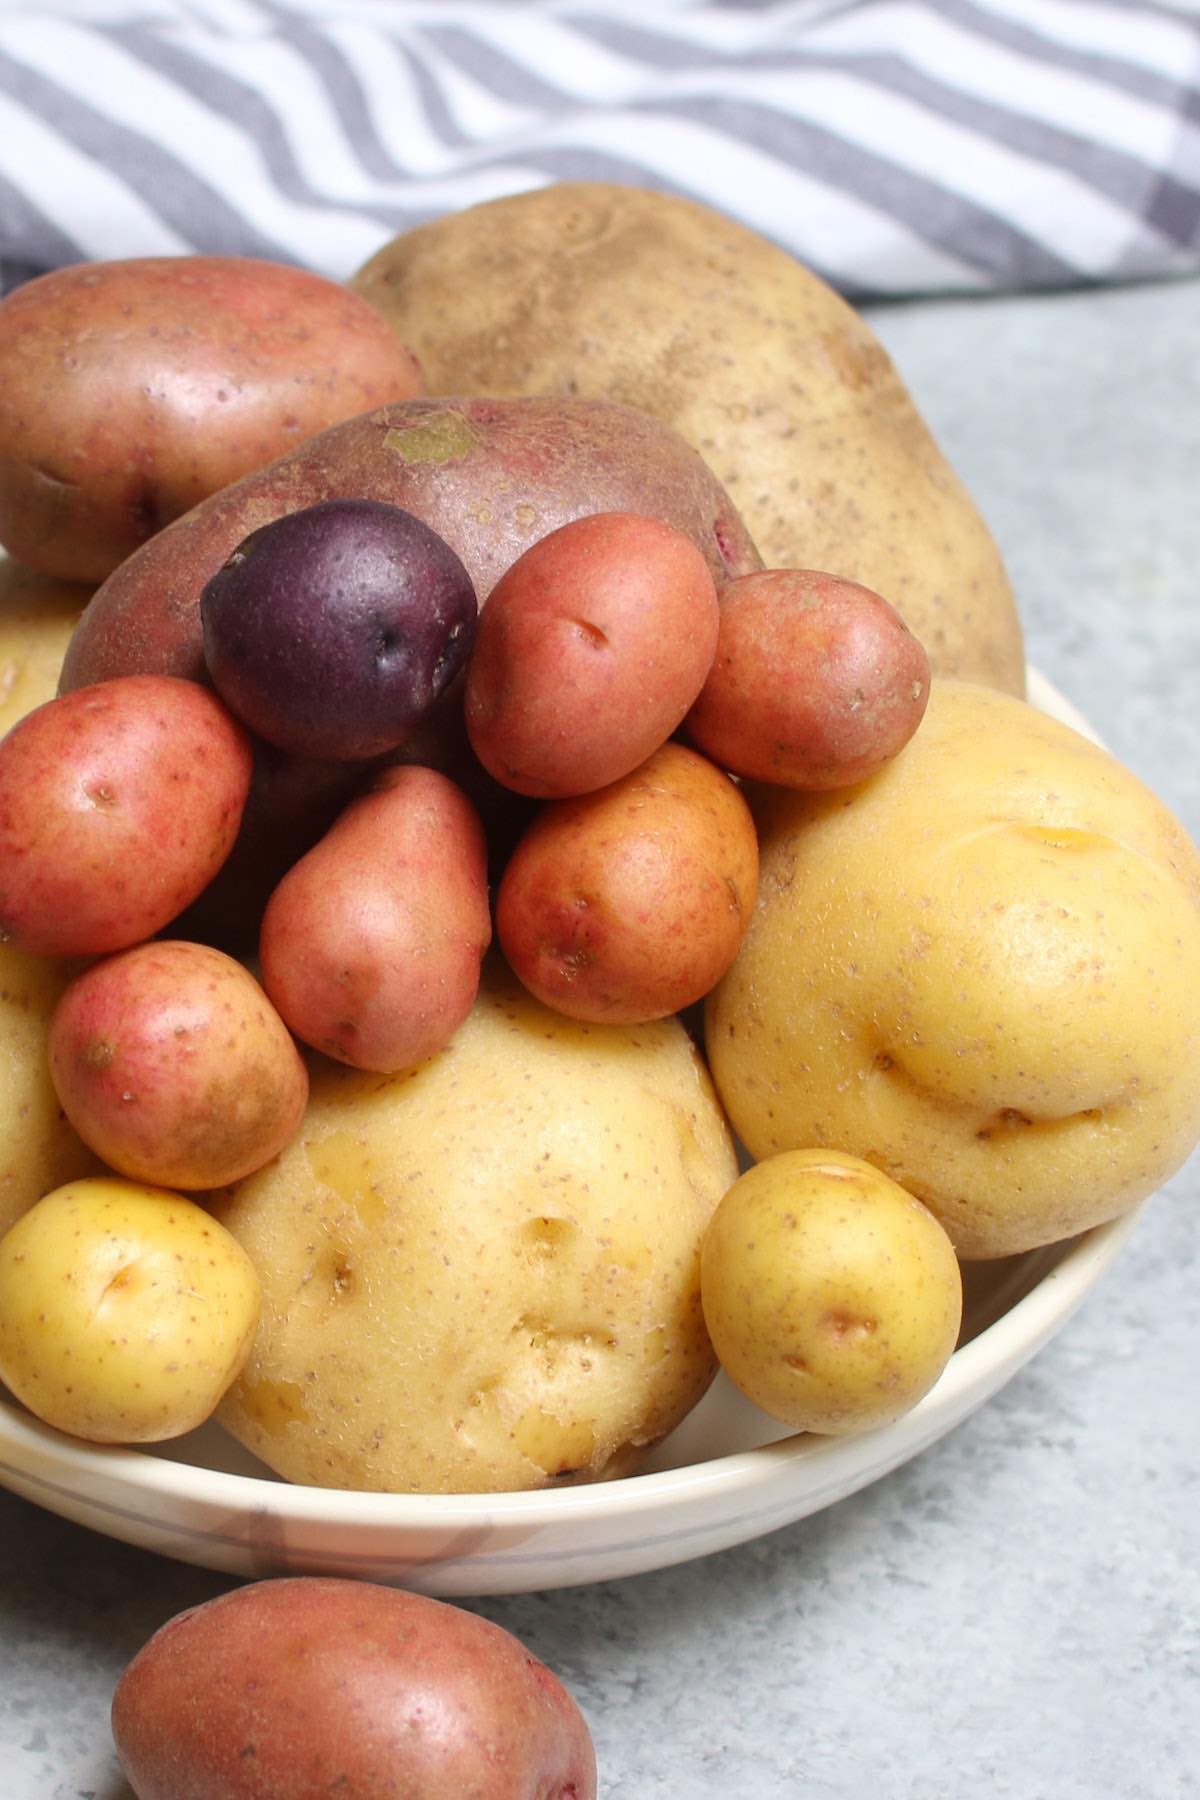 Various sizes and types of potatoes suitable for boiling